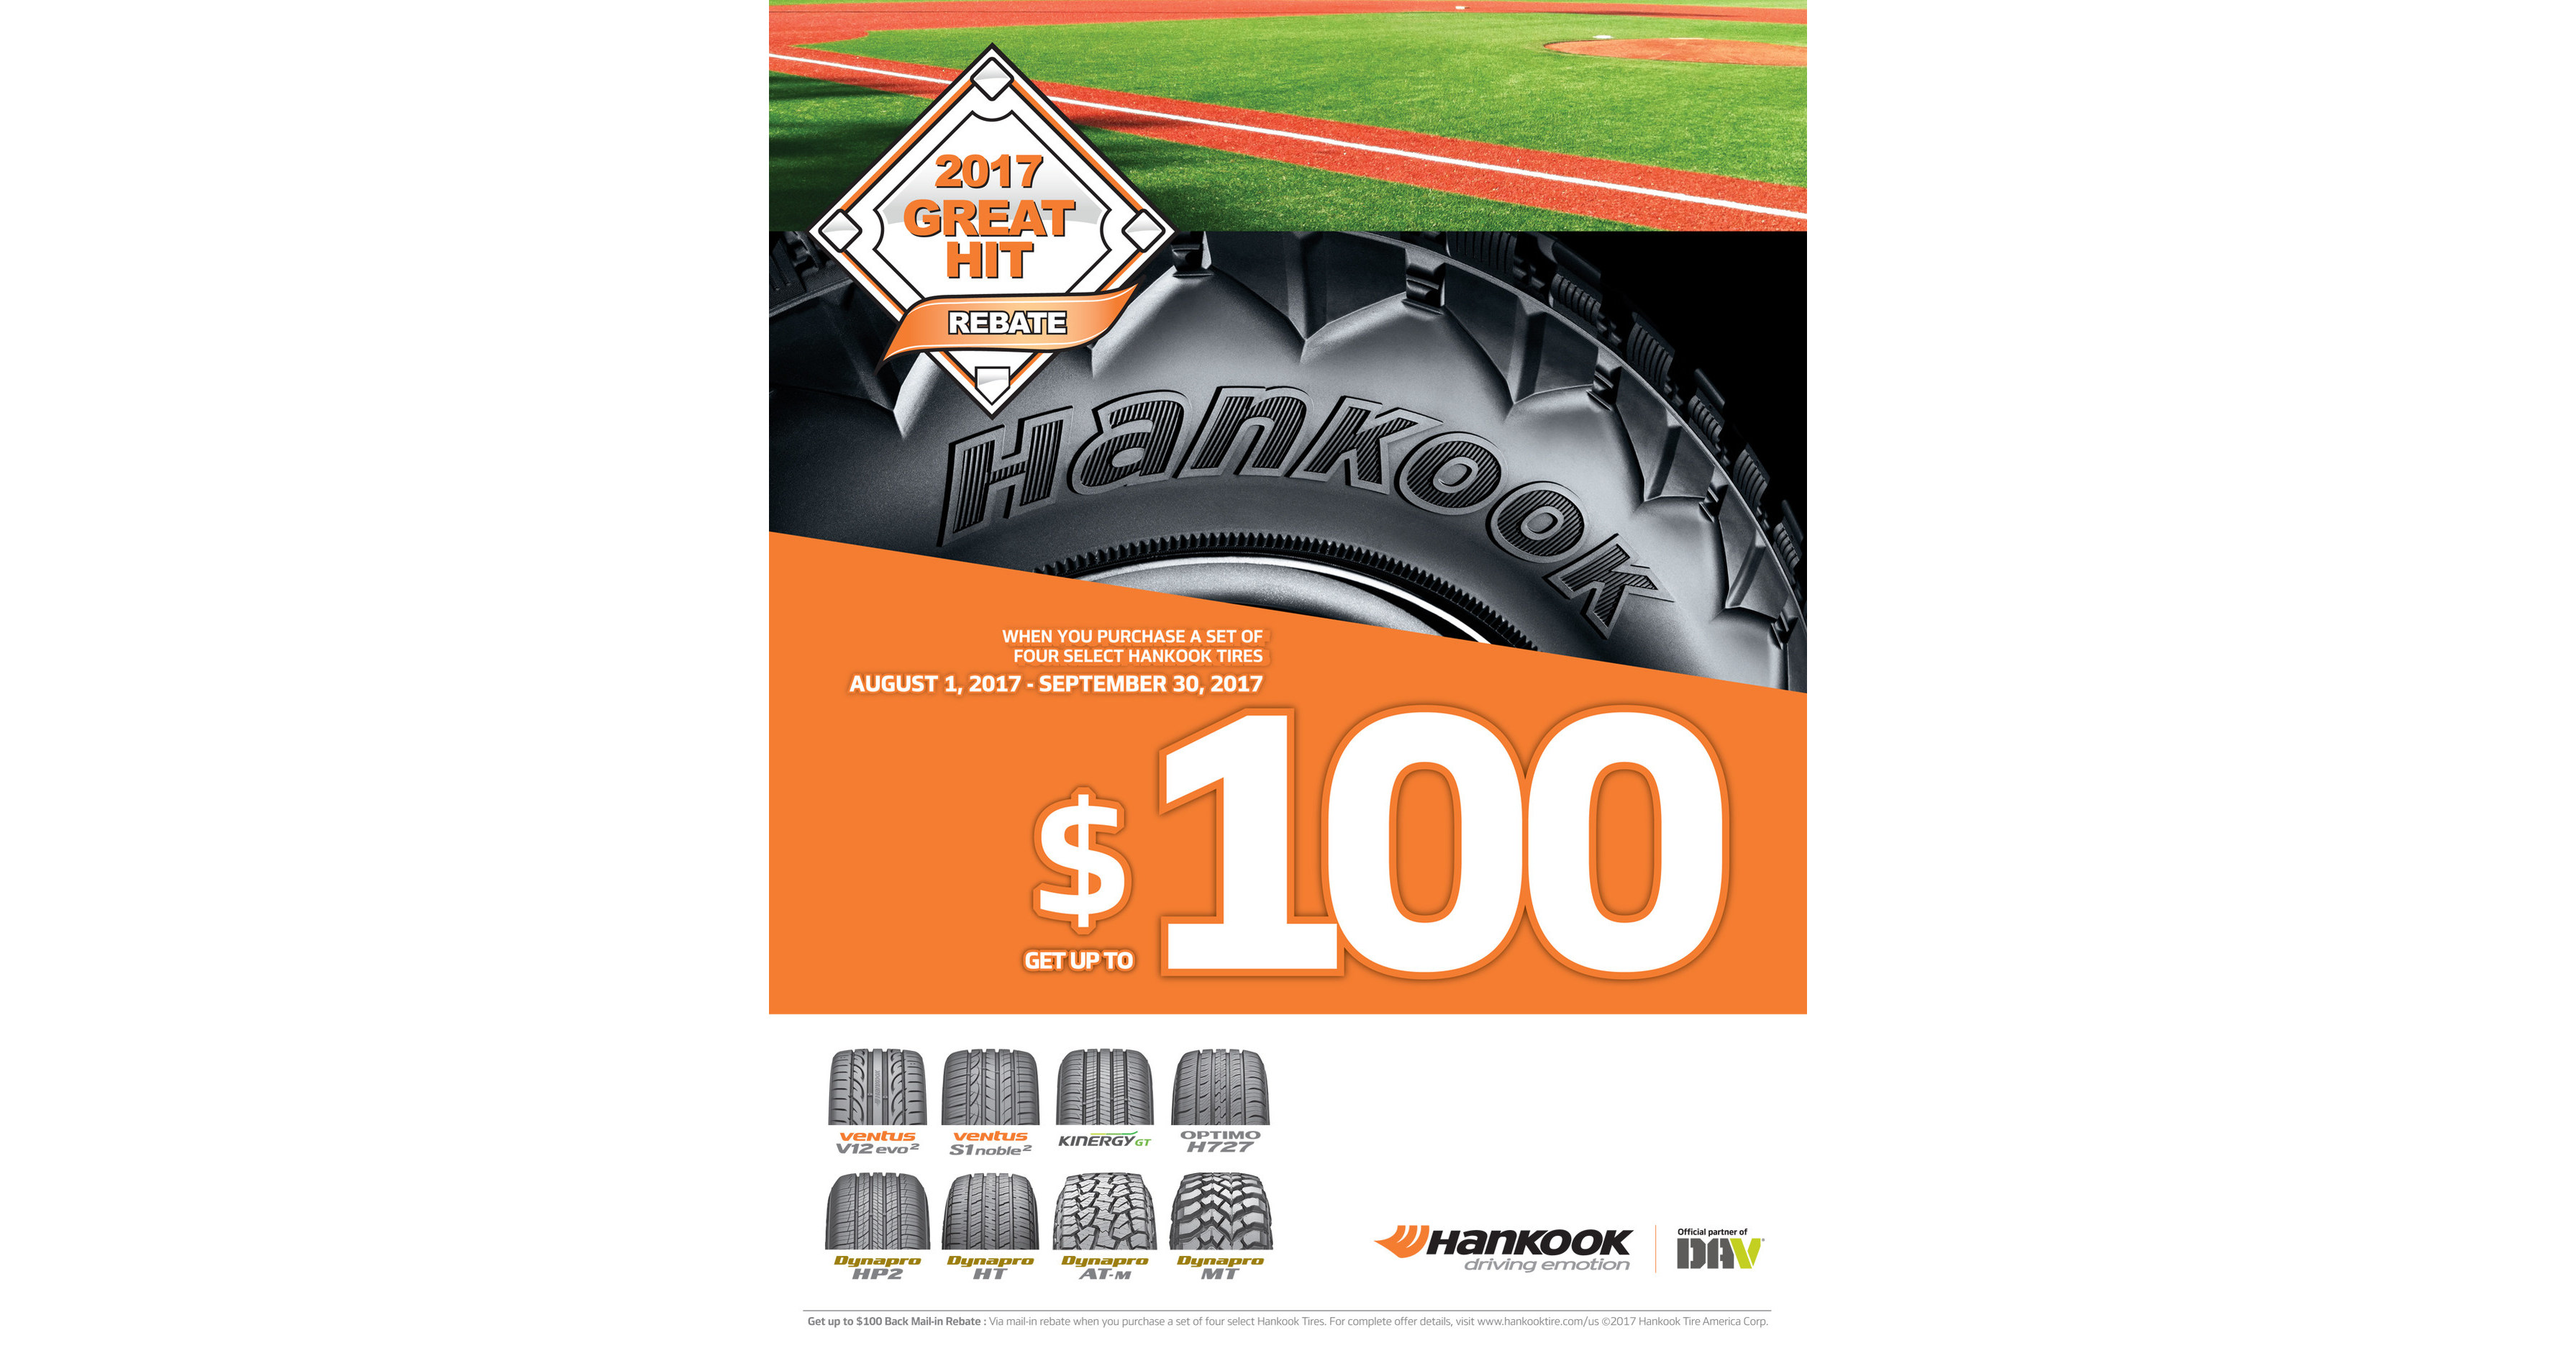 Hankook Tire Delivers Home Run Offer with 2017 'Great Hit' Rebate Promotion